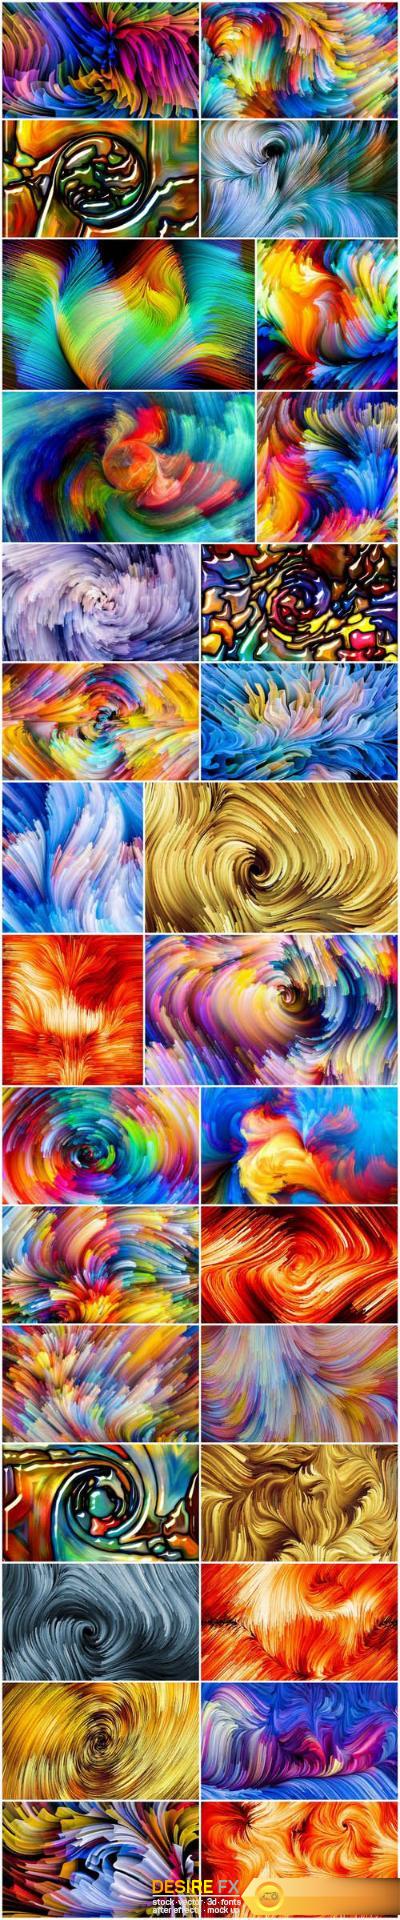 Exploding Color and Abstract Backgrounds - Set of 30xUHQ JPEG Professional Stock Images